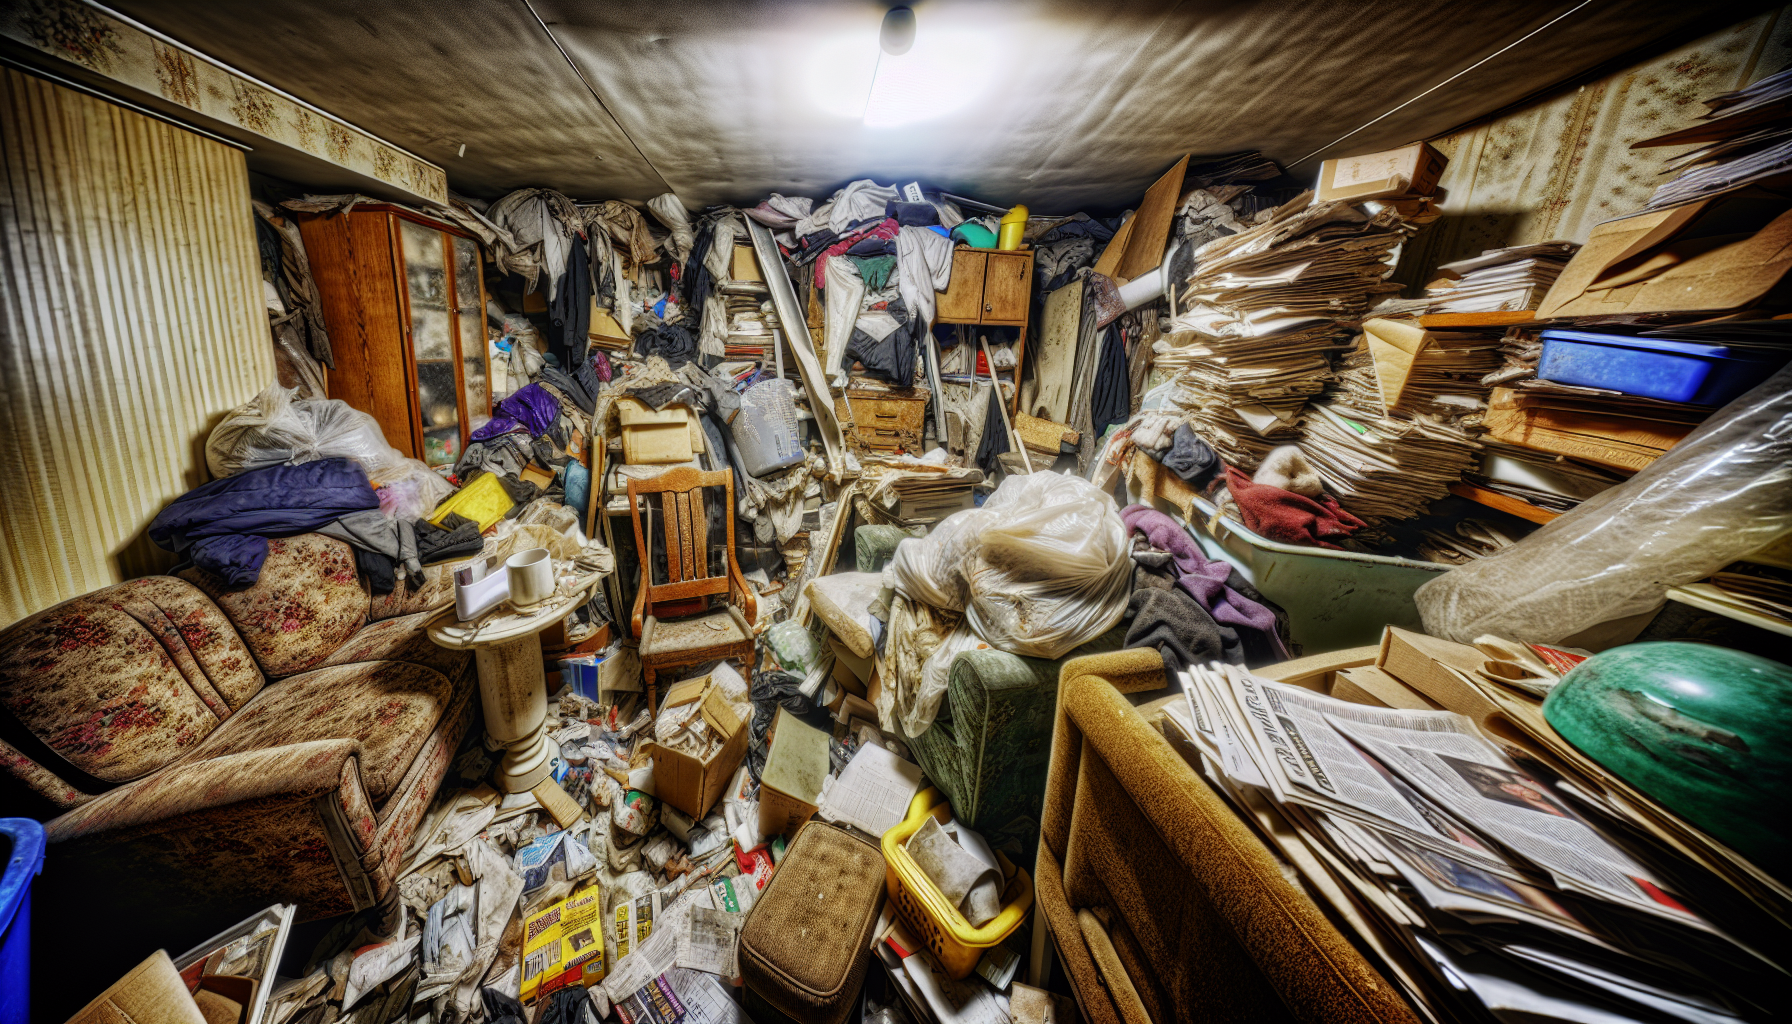 A disorganized and cluttered room with various items and trash